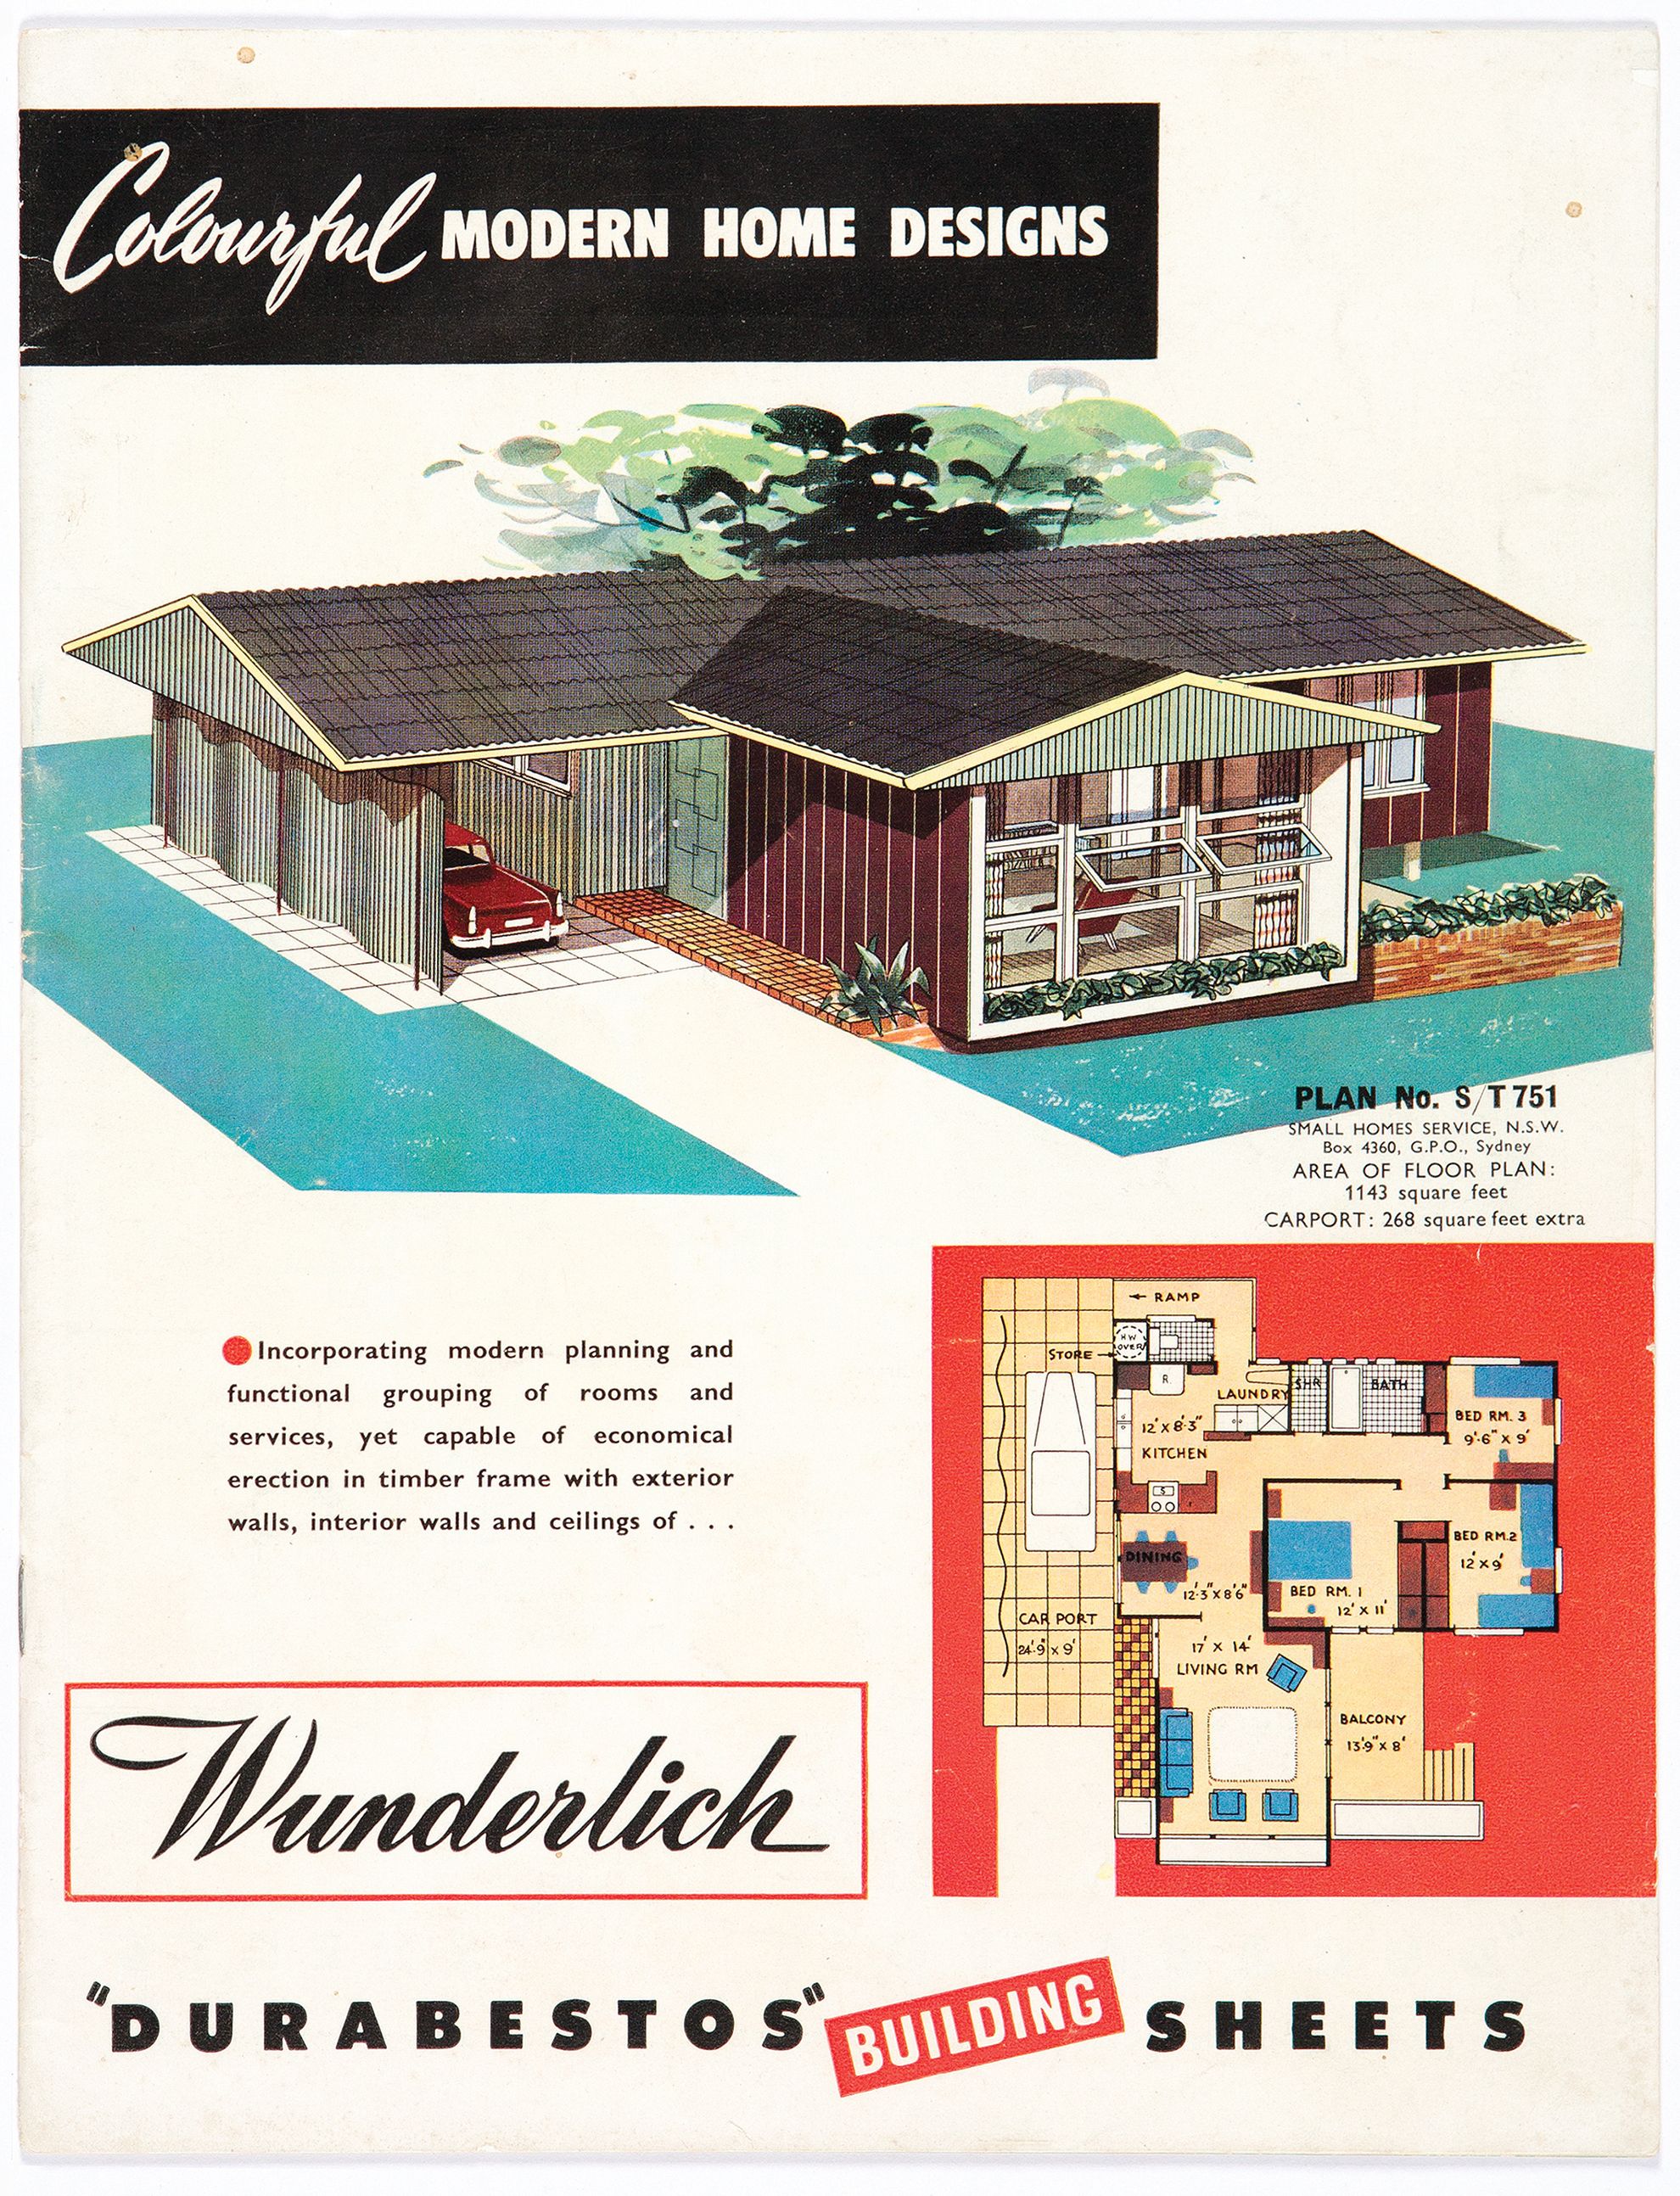 Page from a magazine showing a house and promoting asbestos sheeting